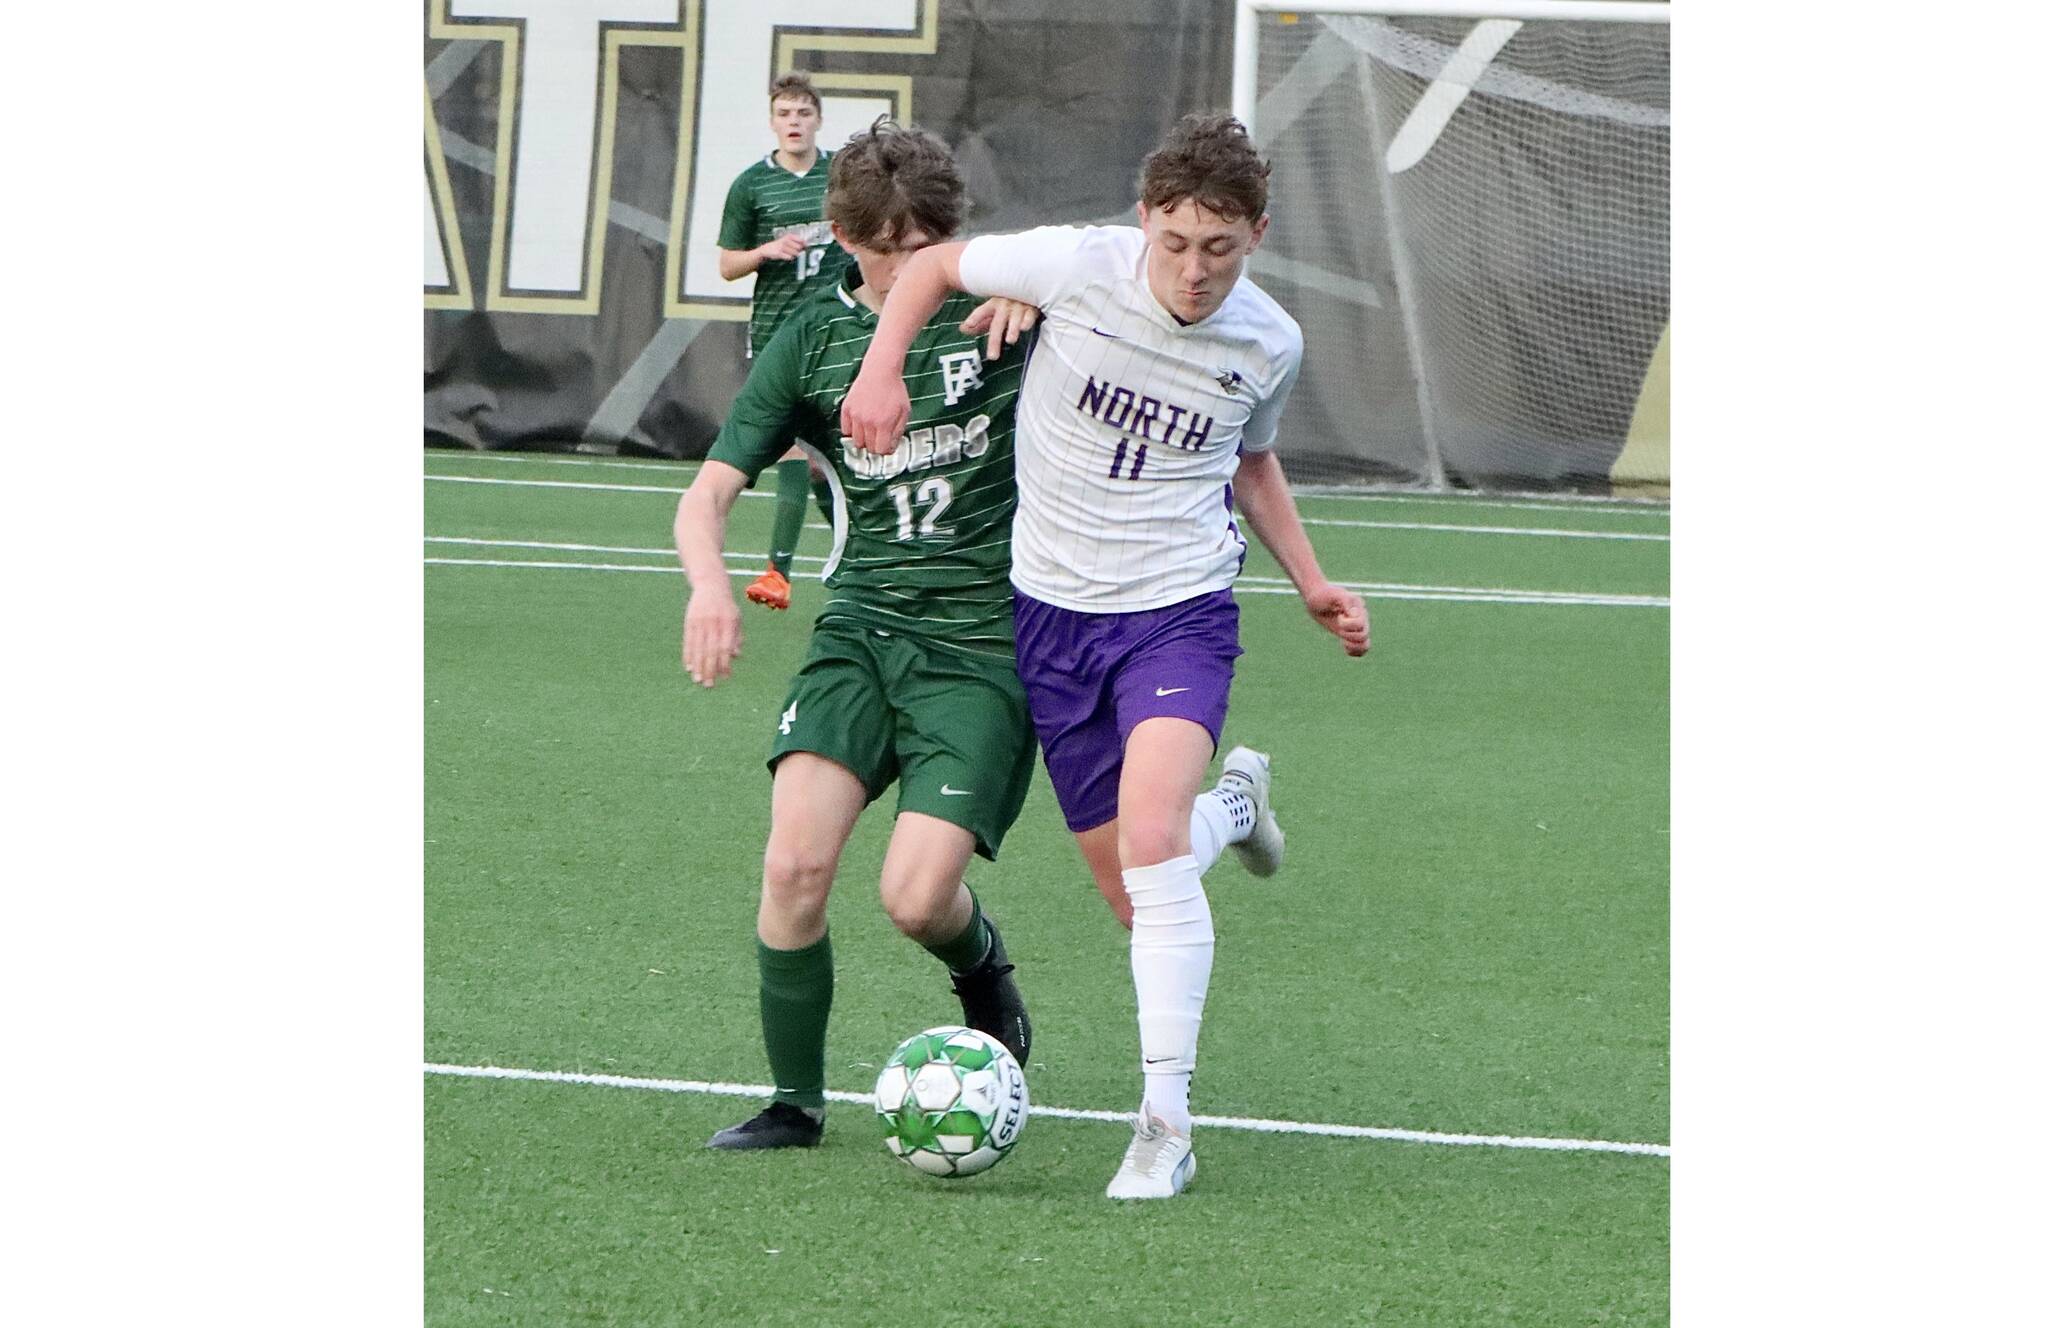 Port Angeles soccer player Cannon Wood (12) is elbowed out of the way by North Kitsap’s Ethan Peck (11) Friday night at Wally Sigmar Field at Peninsula College. (Dave Logan/for Peninsula Daily News).